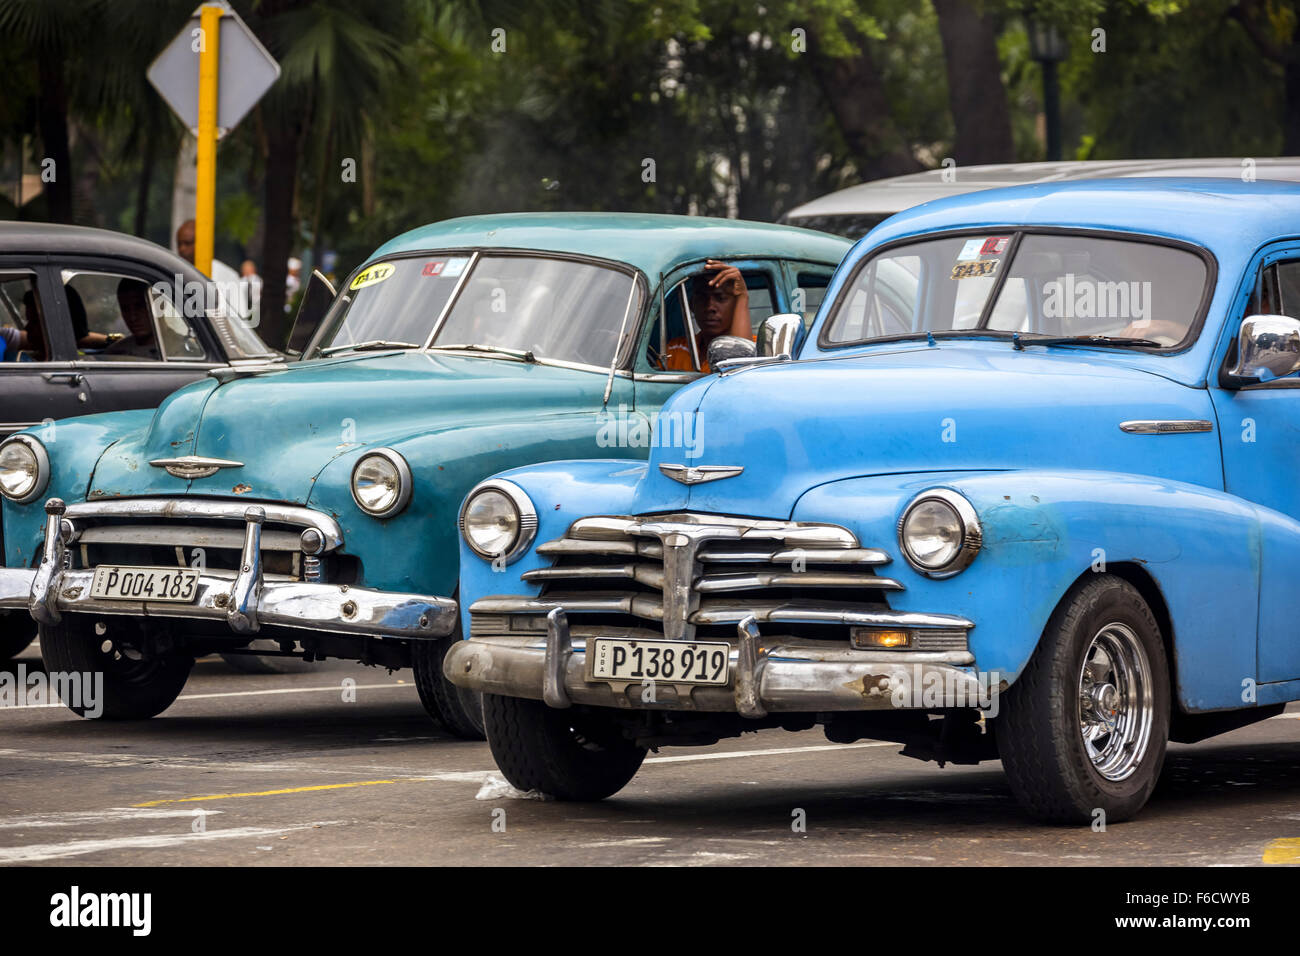 turquoise and blue vintage car on the streets, old American road cruiser on the streets of Havana, Taxi, La Habana, Havana, Cuba Stock Photo